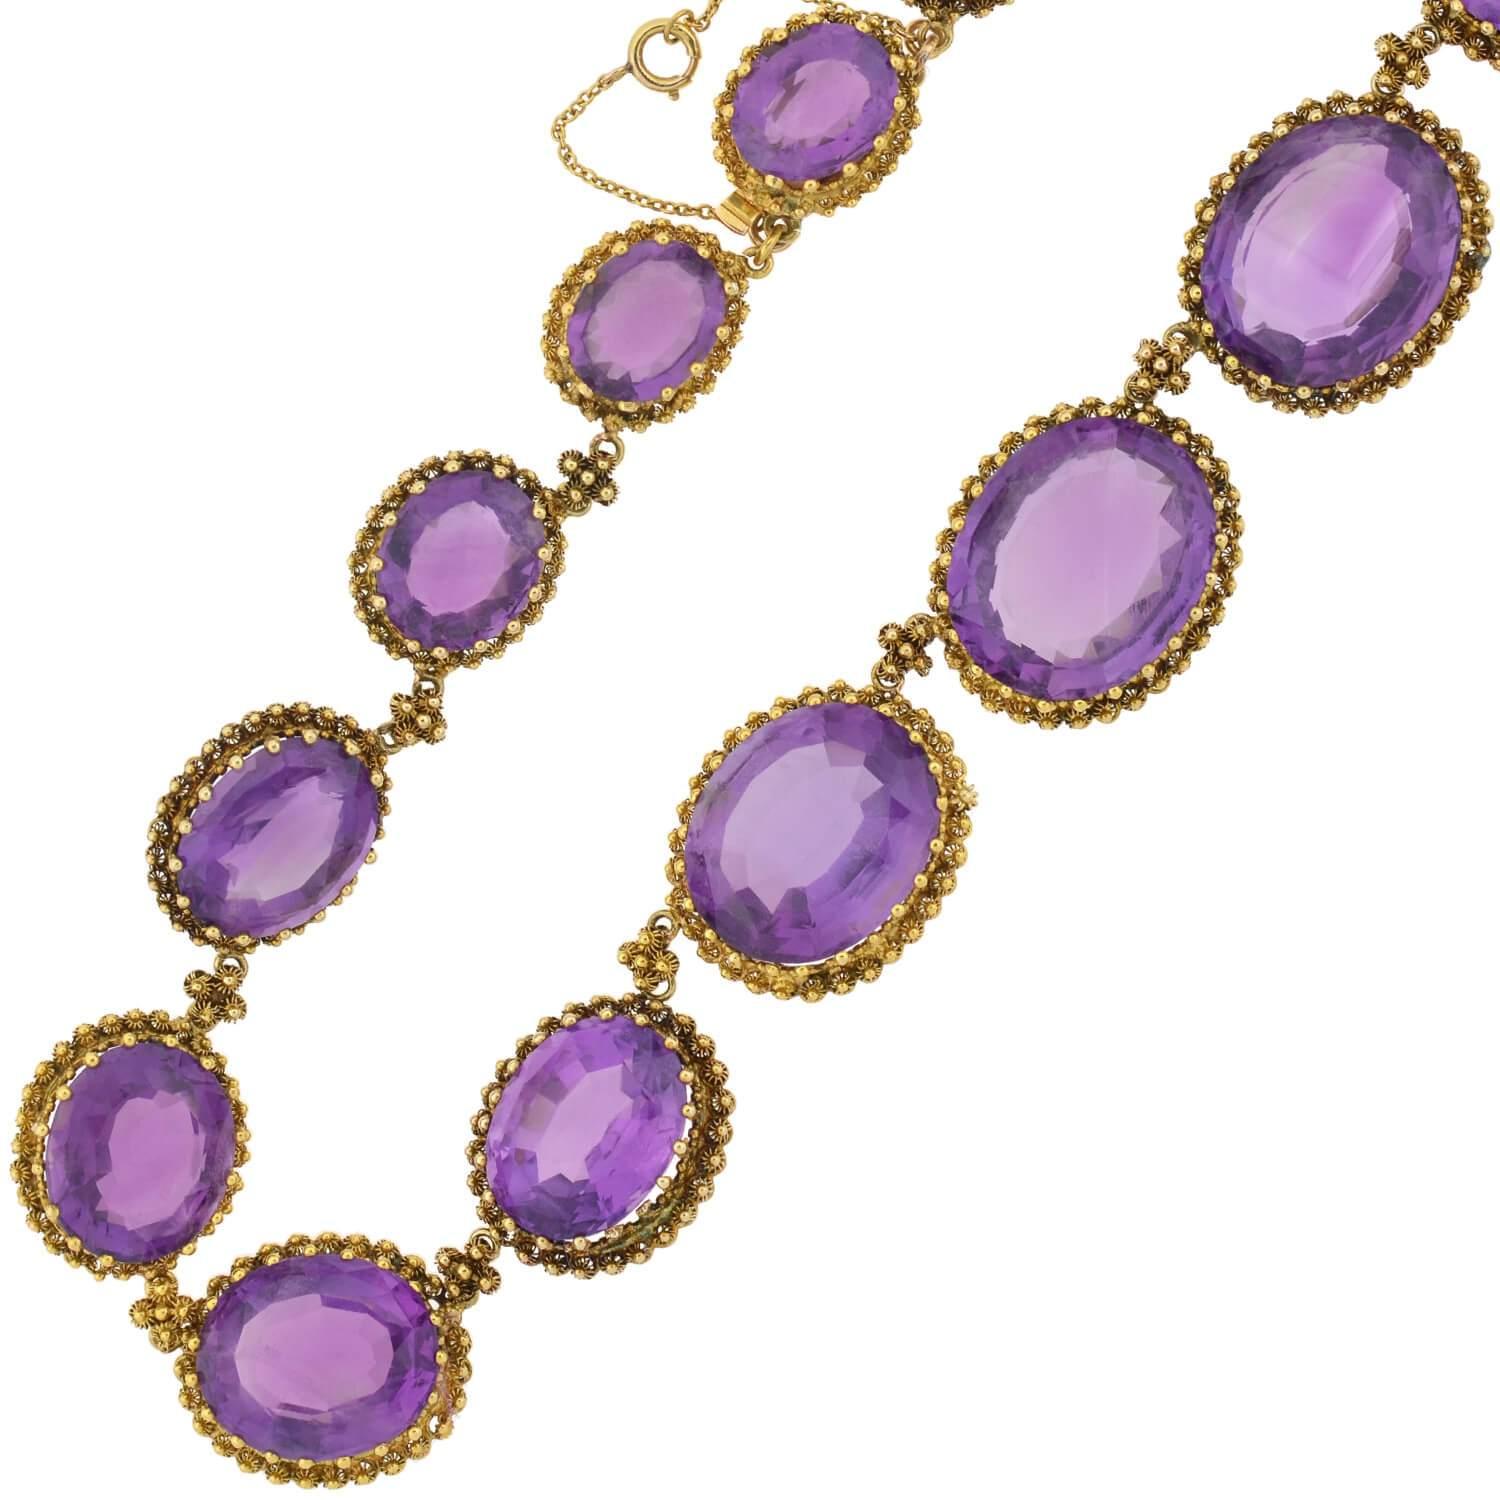 Victorian Faceted Amethyst and Cannetille Wirework Link Necklace In Good Condition For Sale In Narberth, PA